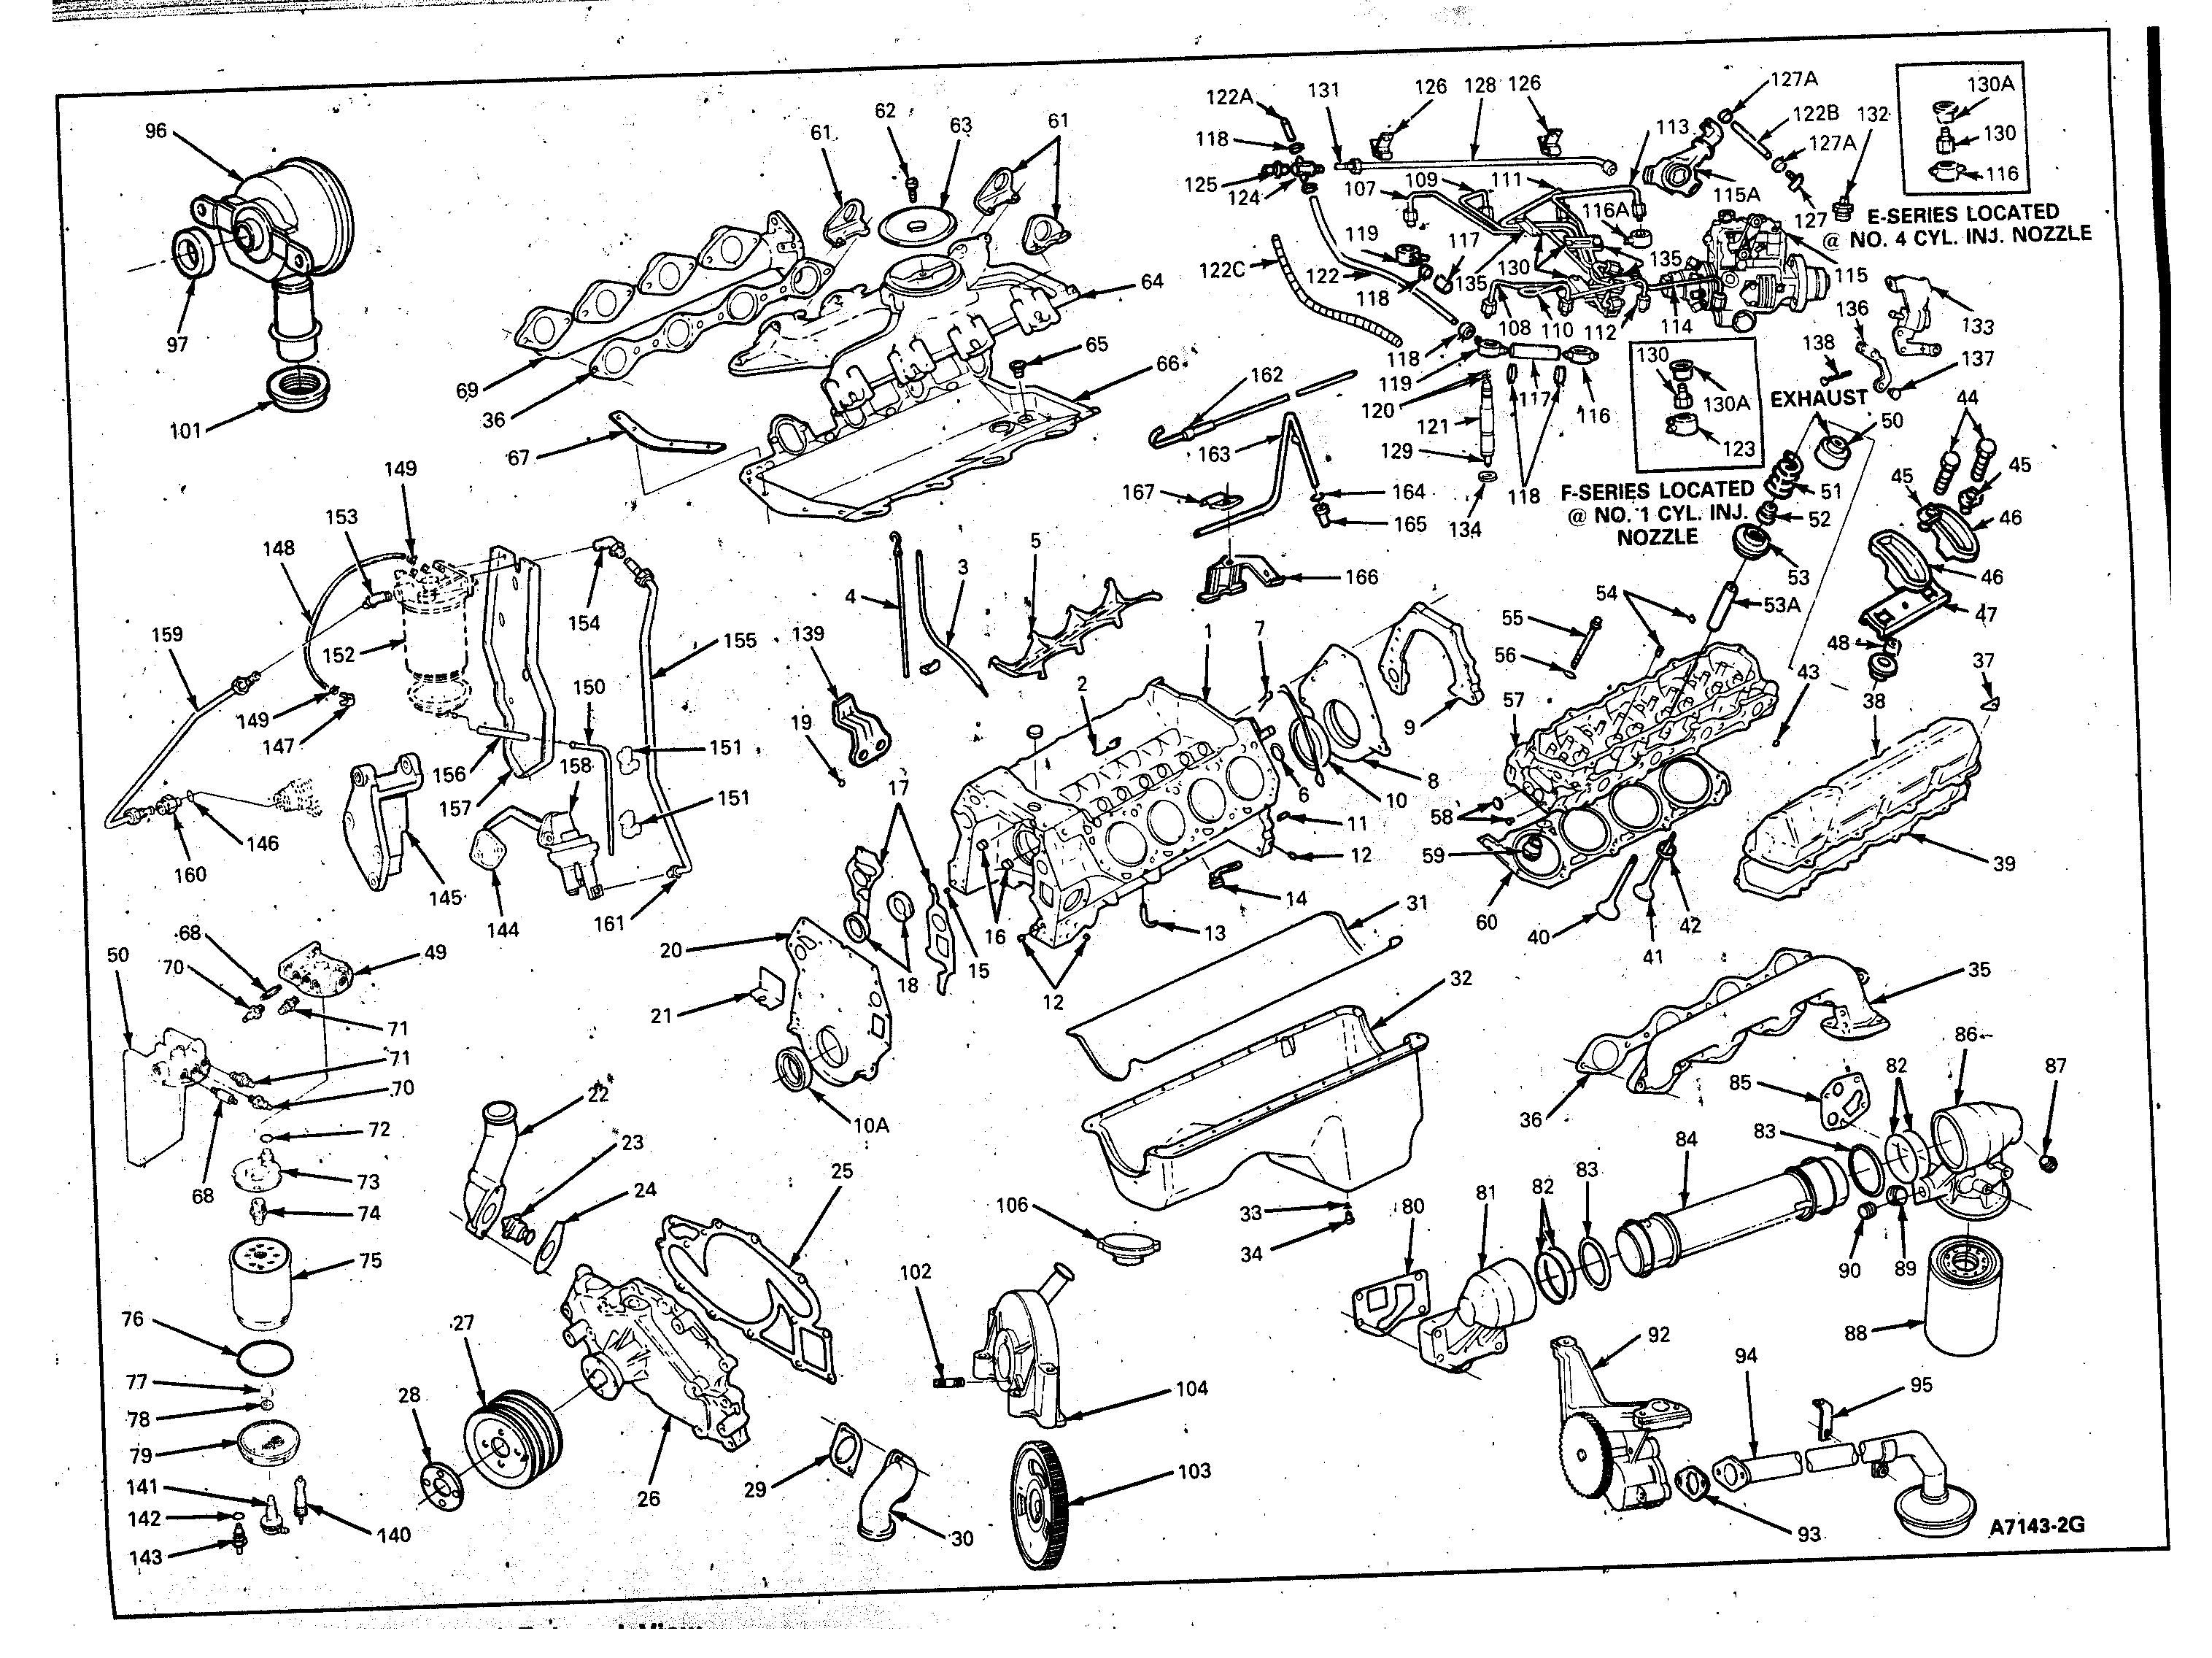 Ford part numbers drawings #10